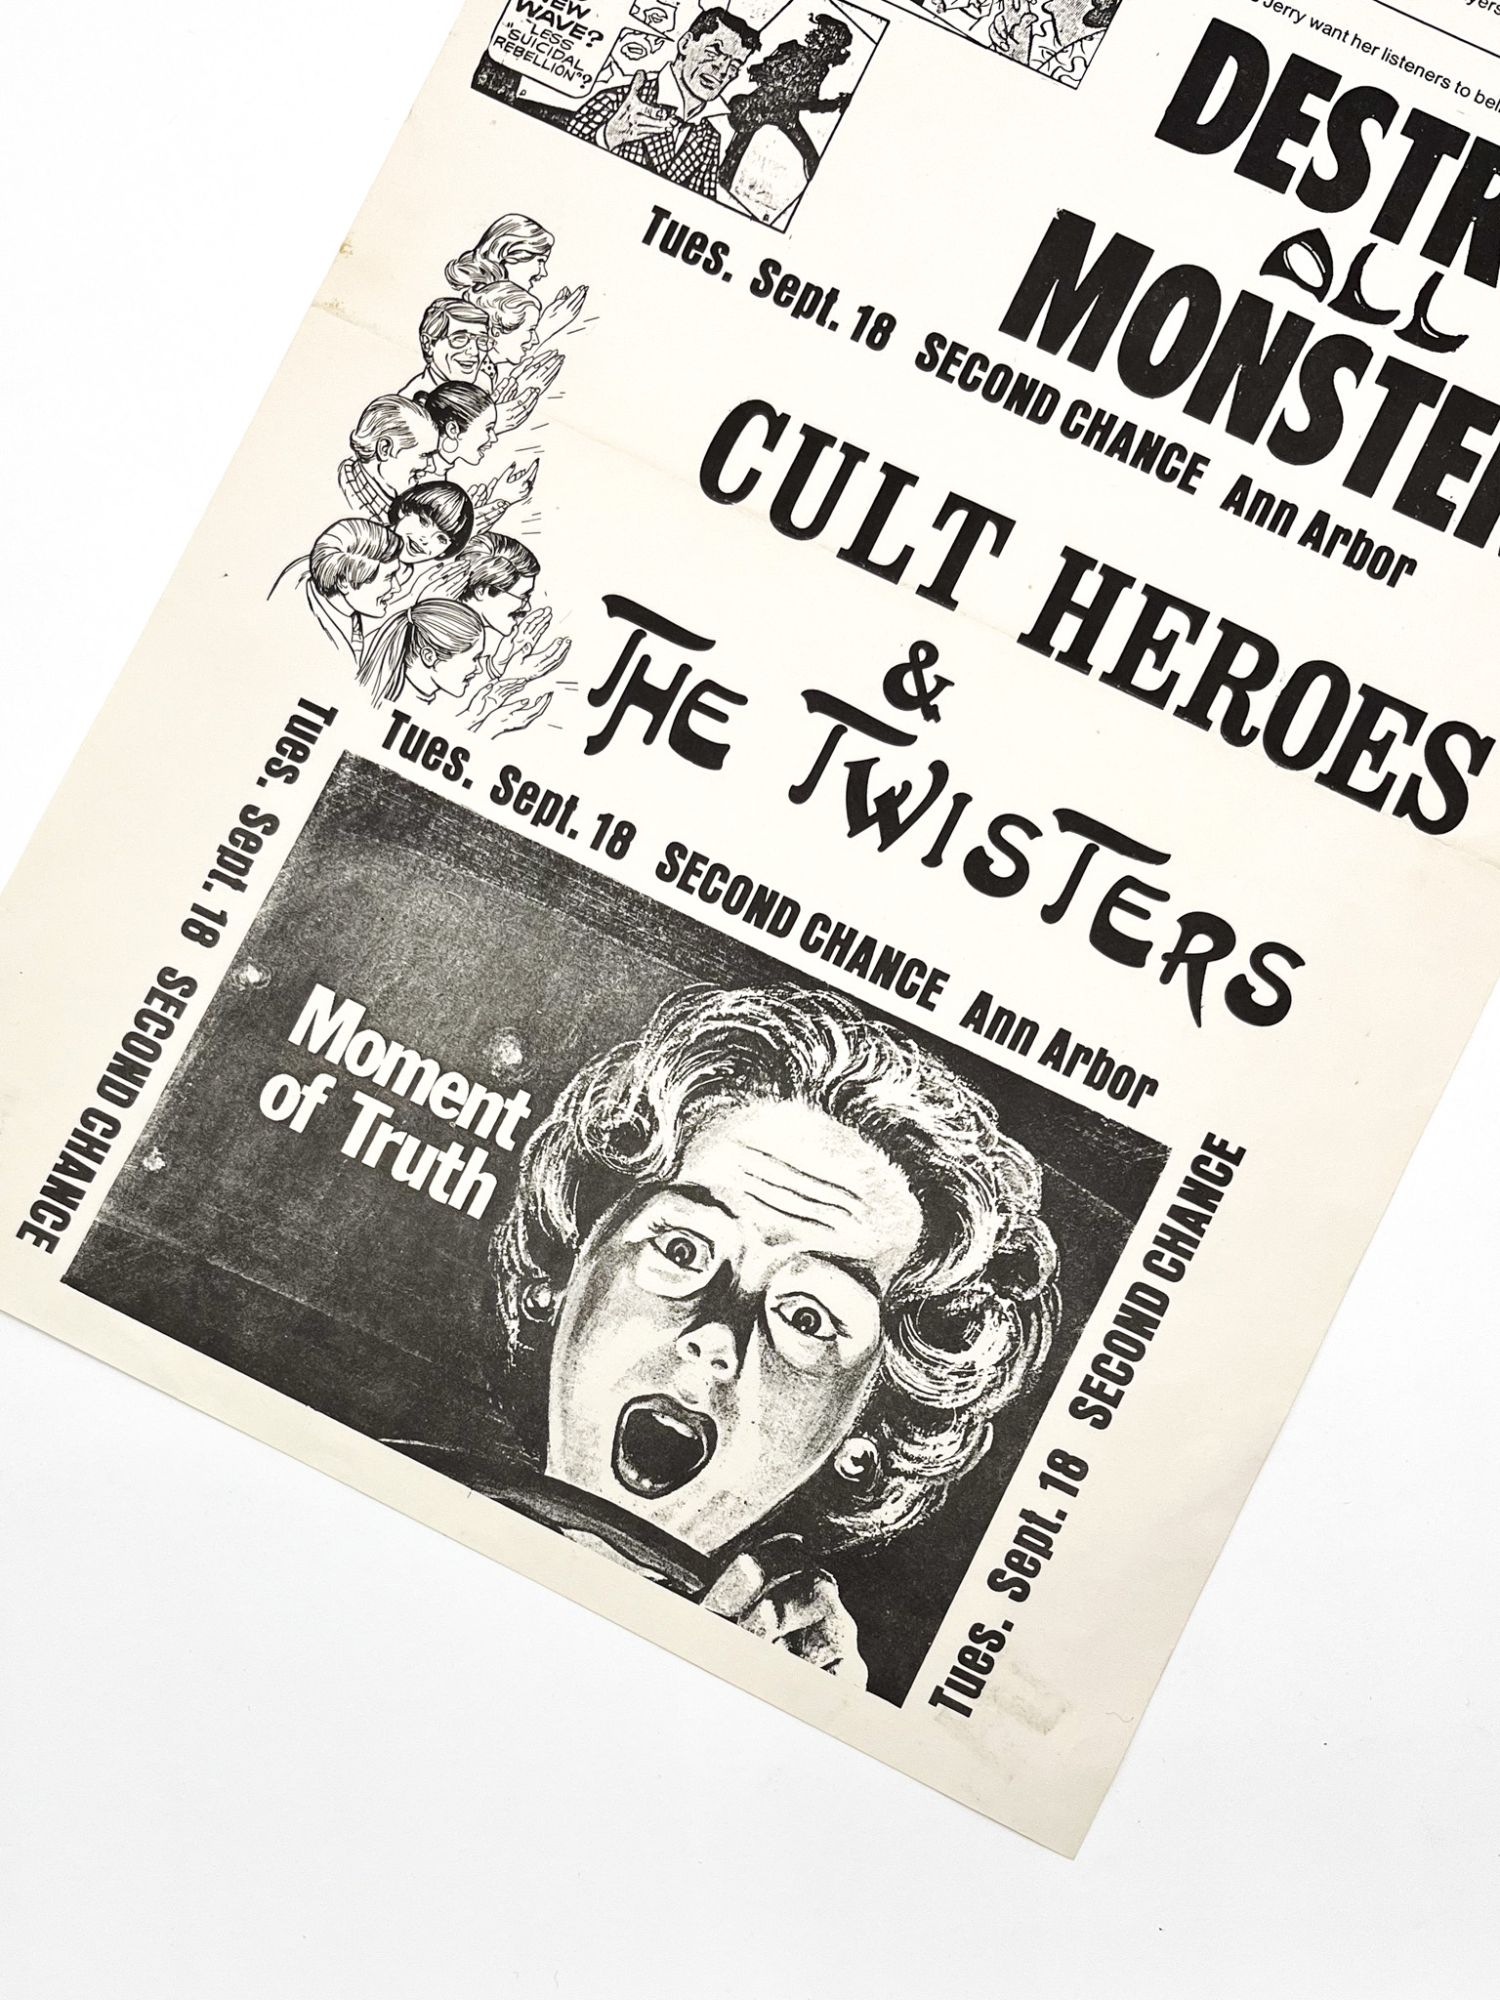 DESTROY ALL MONSTERS [,] CULT HEROES & THE 